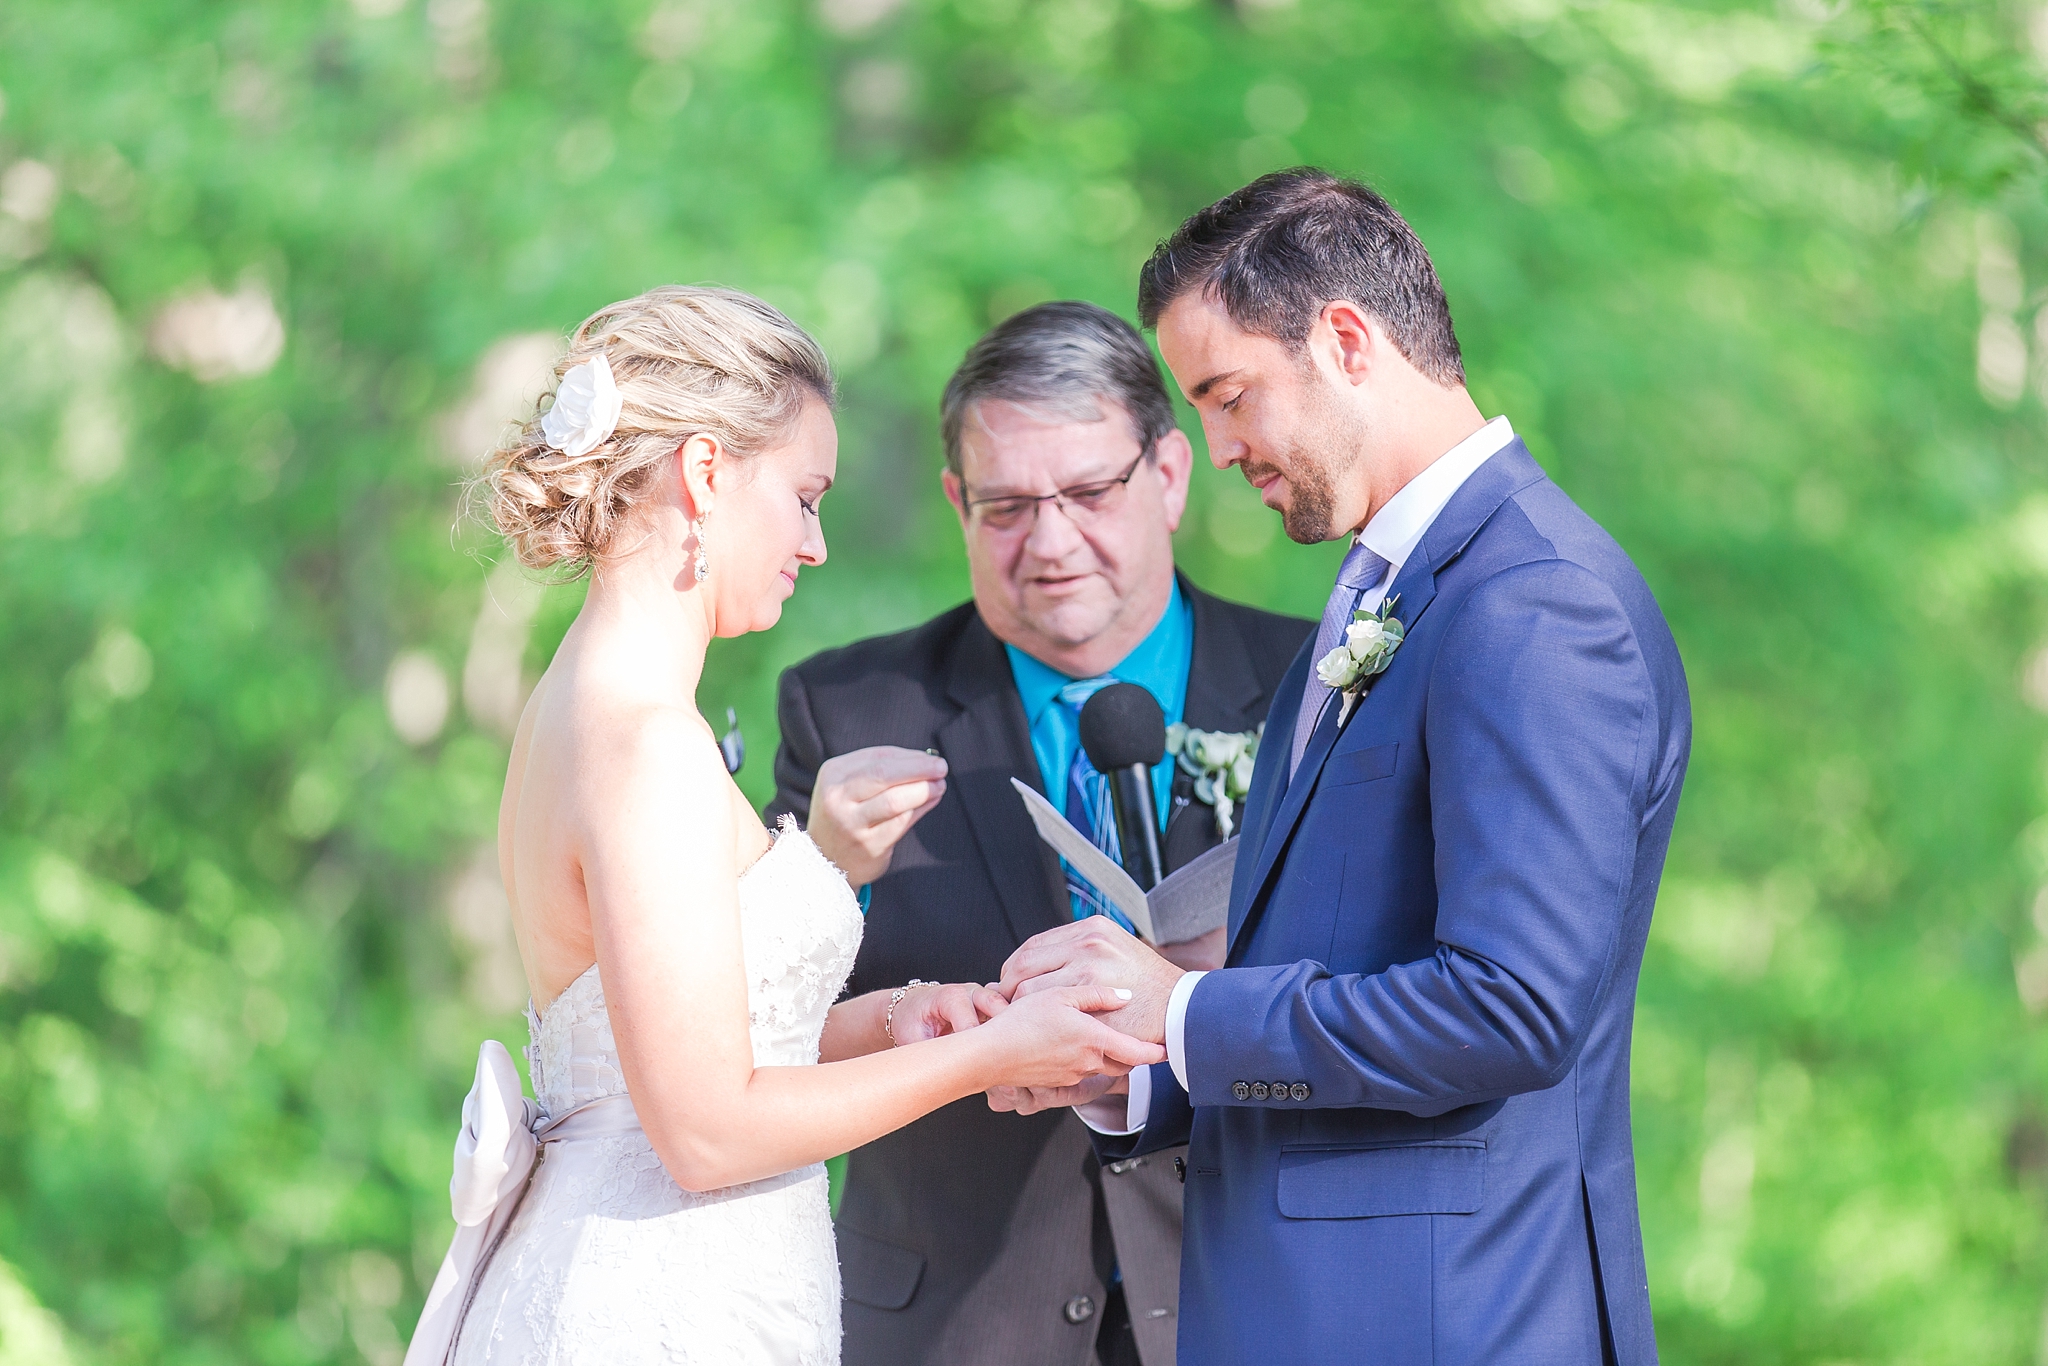 fun-candid-laid-back-wedding-photos-at-wellers-carriage-house-in-saline-michigan-and-at-the-eagle-crest-golf-resort-by-courtney-carolyn-photography_0069.jpg